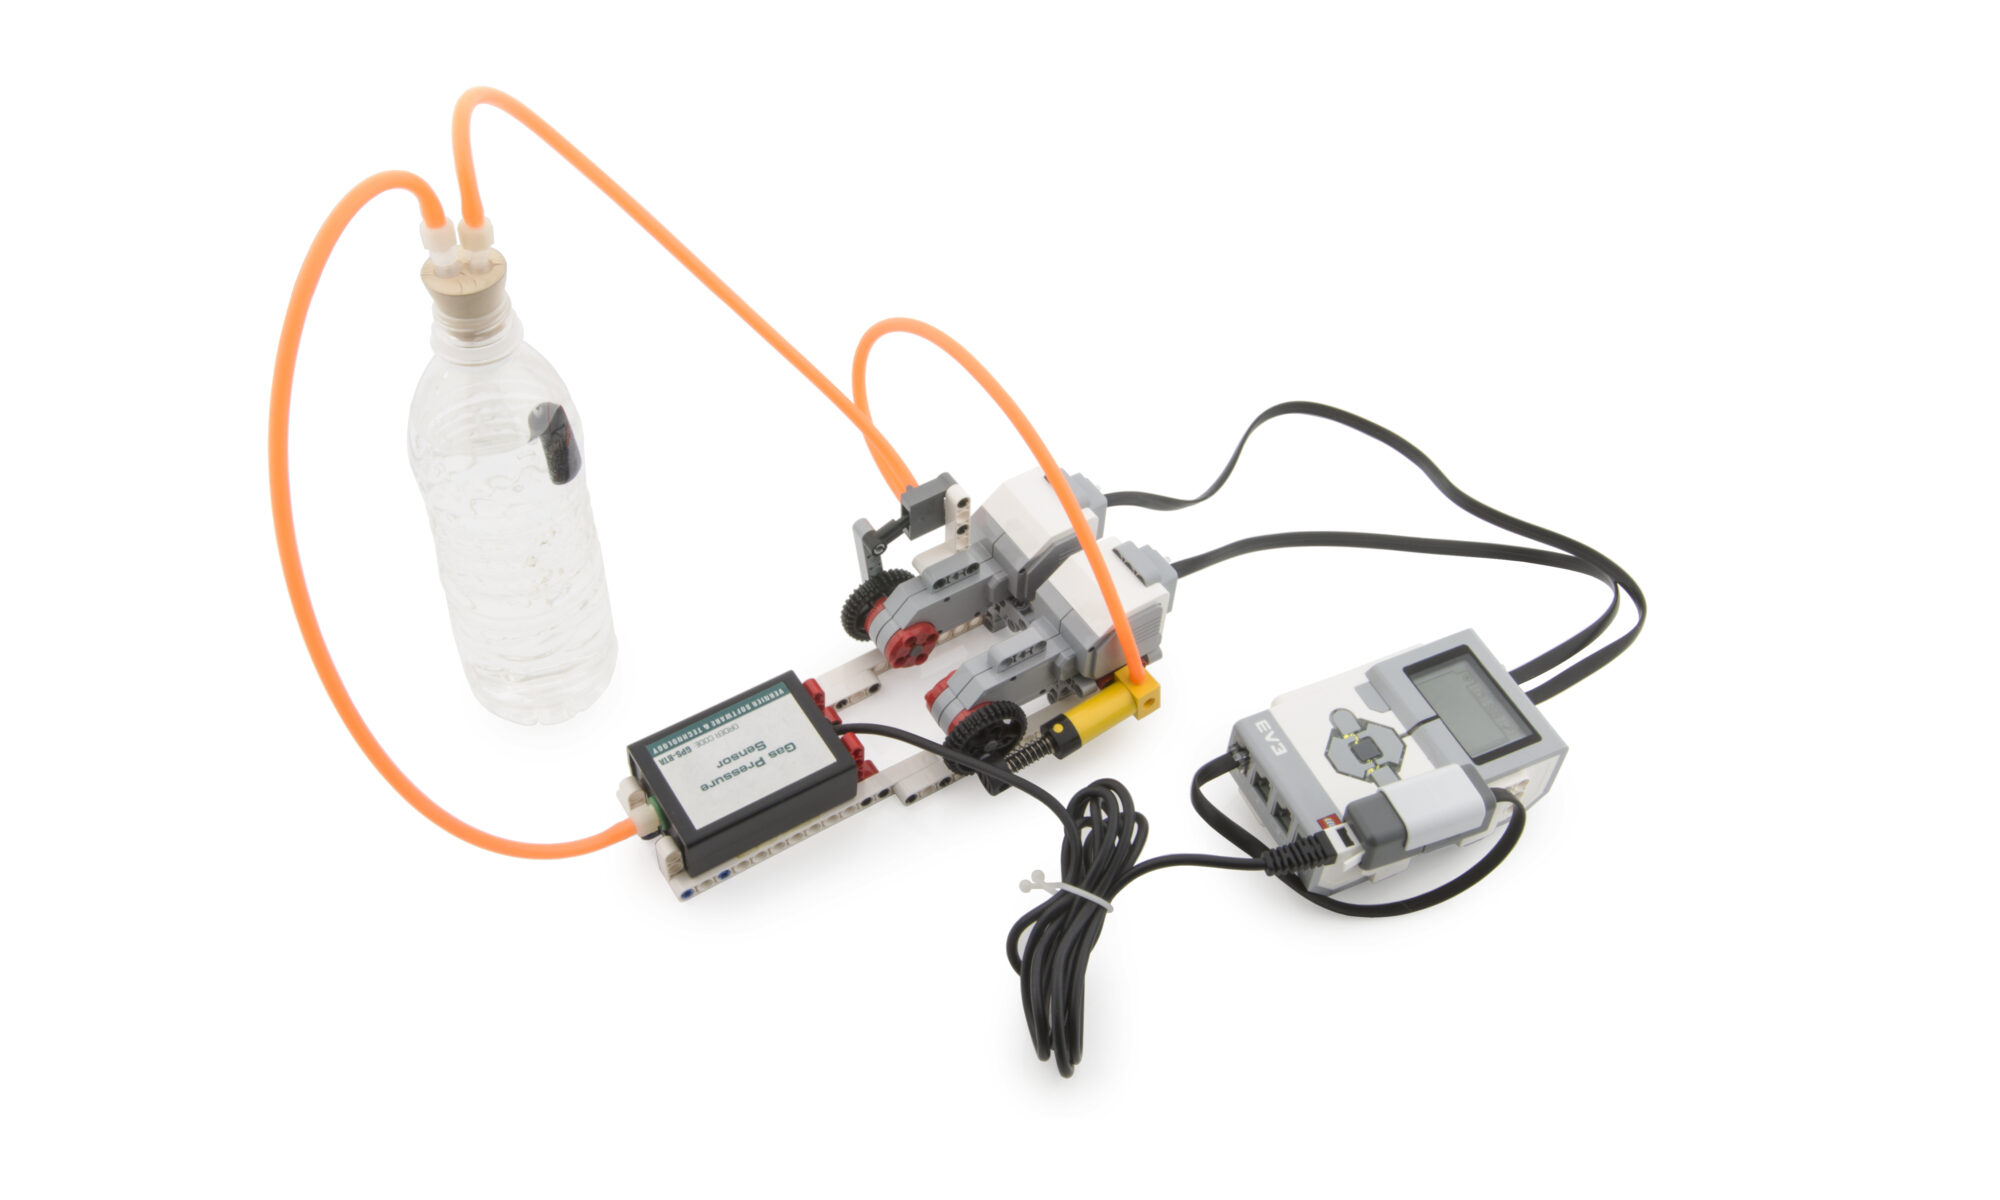 Gas Pressure Sensor product image, connected with sealed bottle